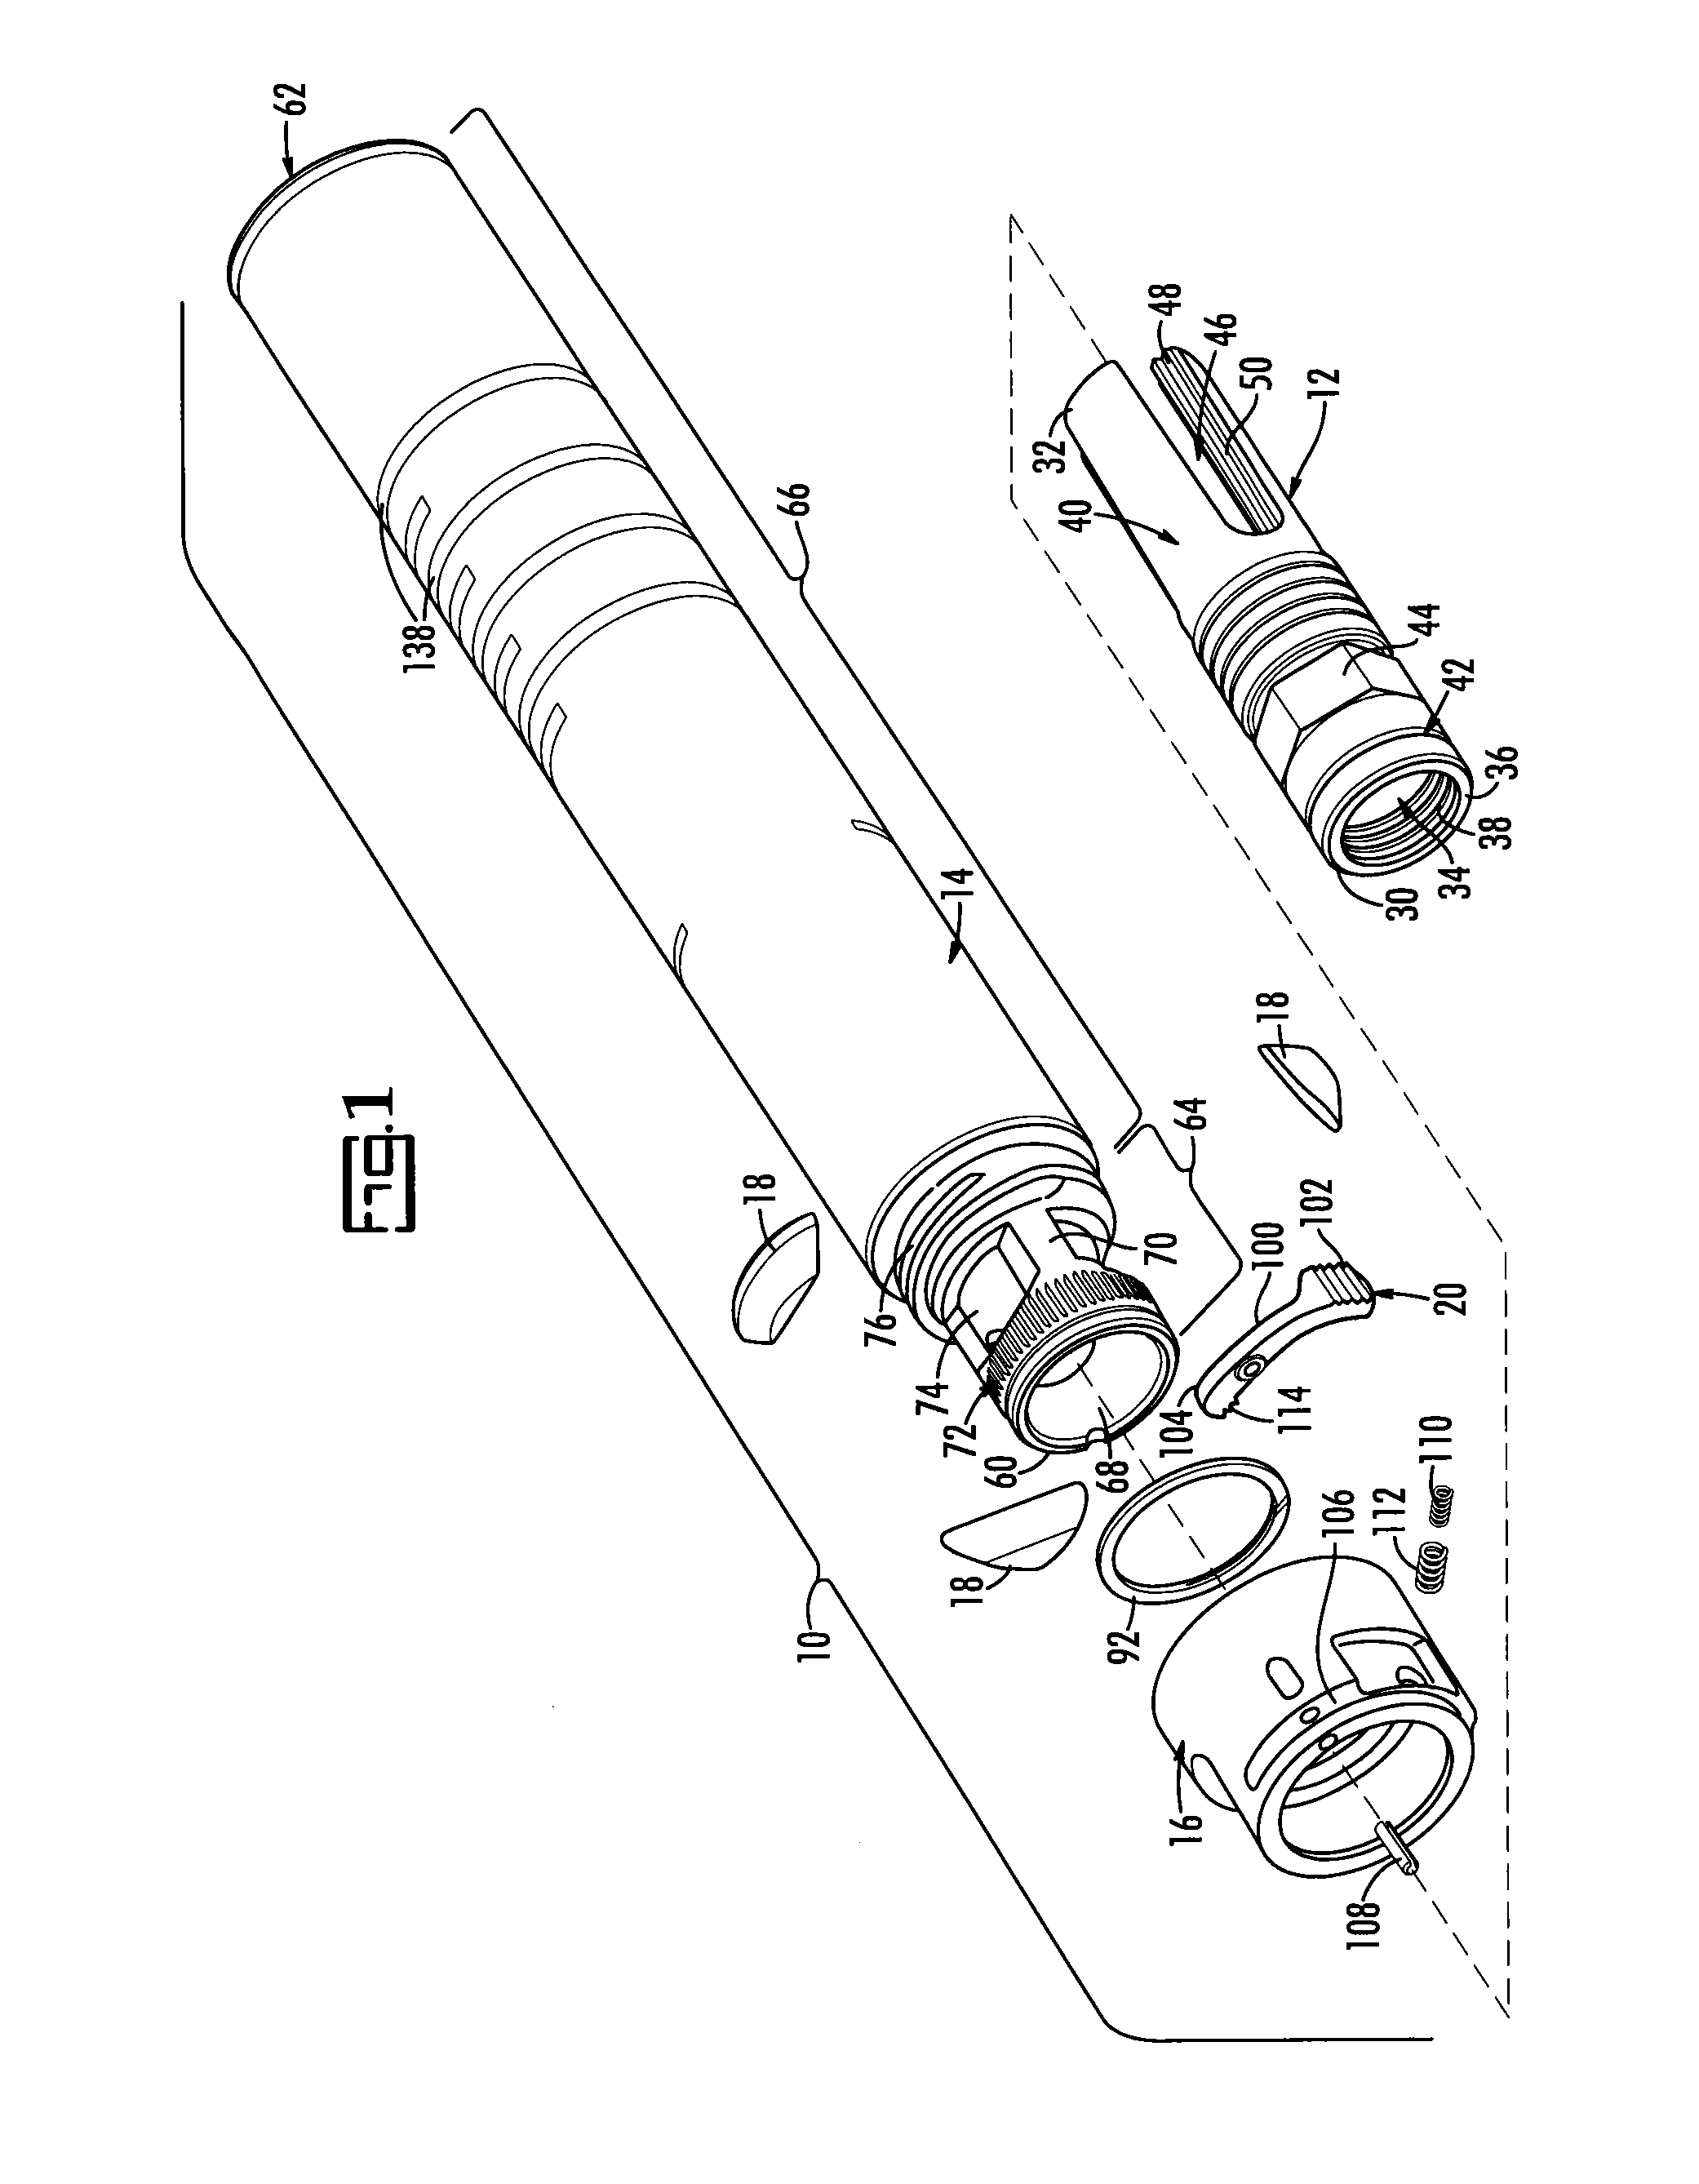 Flash and sound suppressor for a firearm